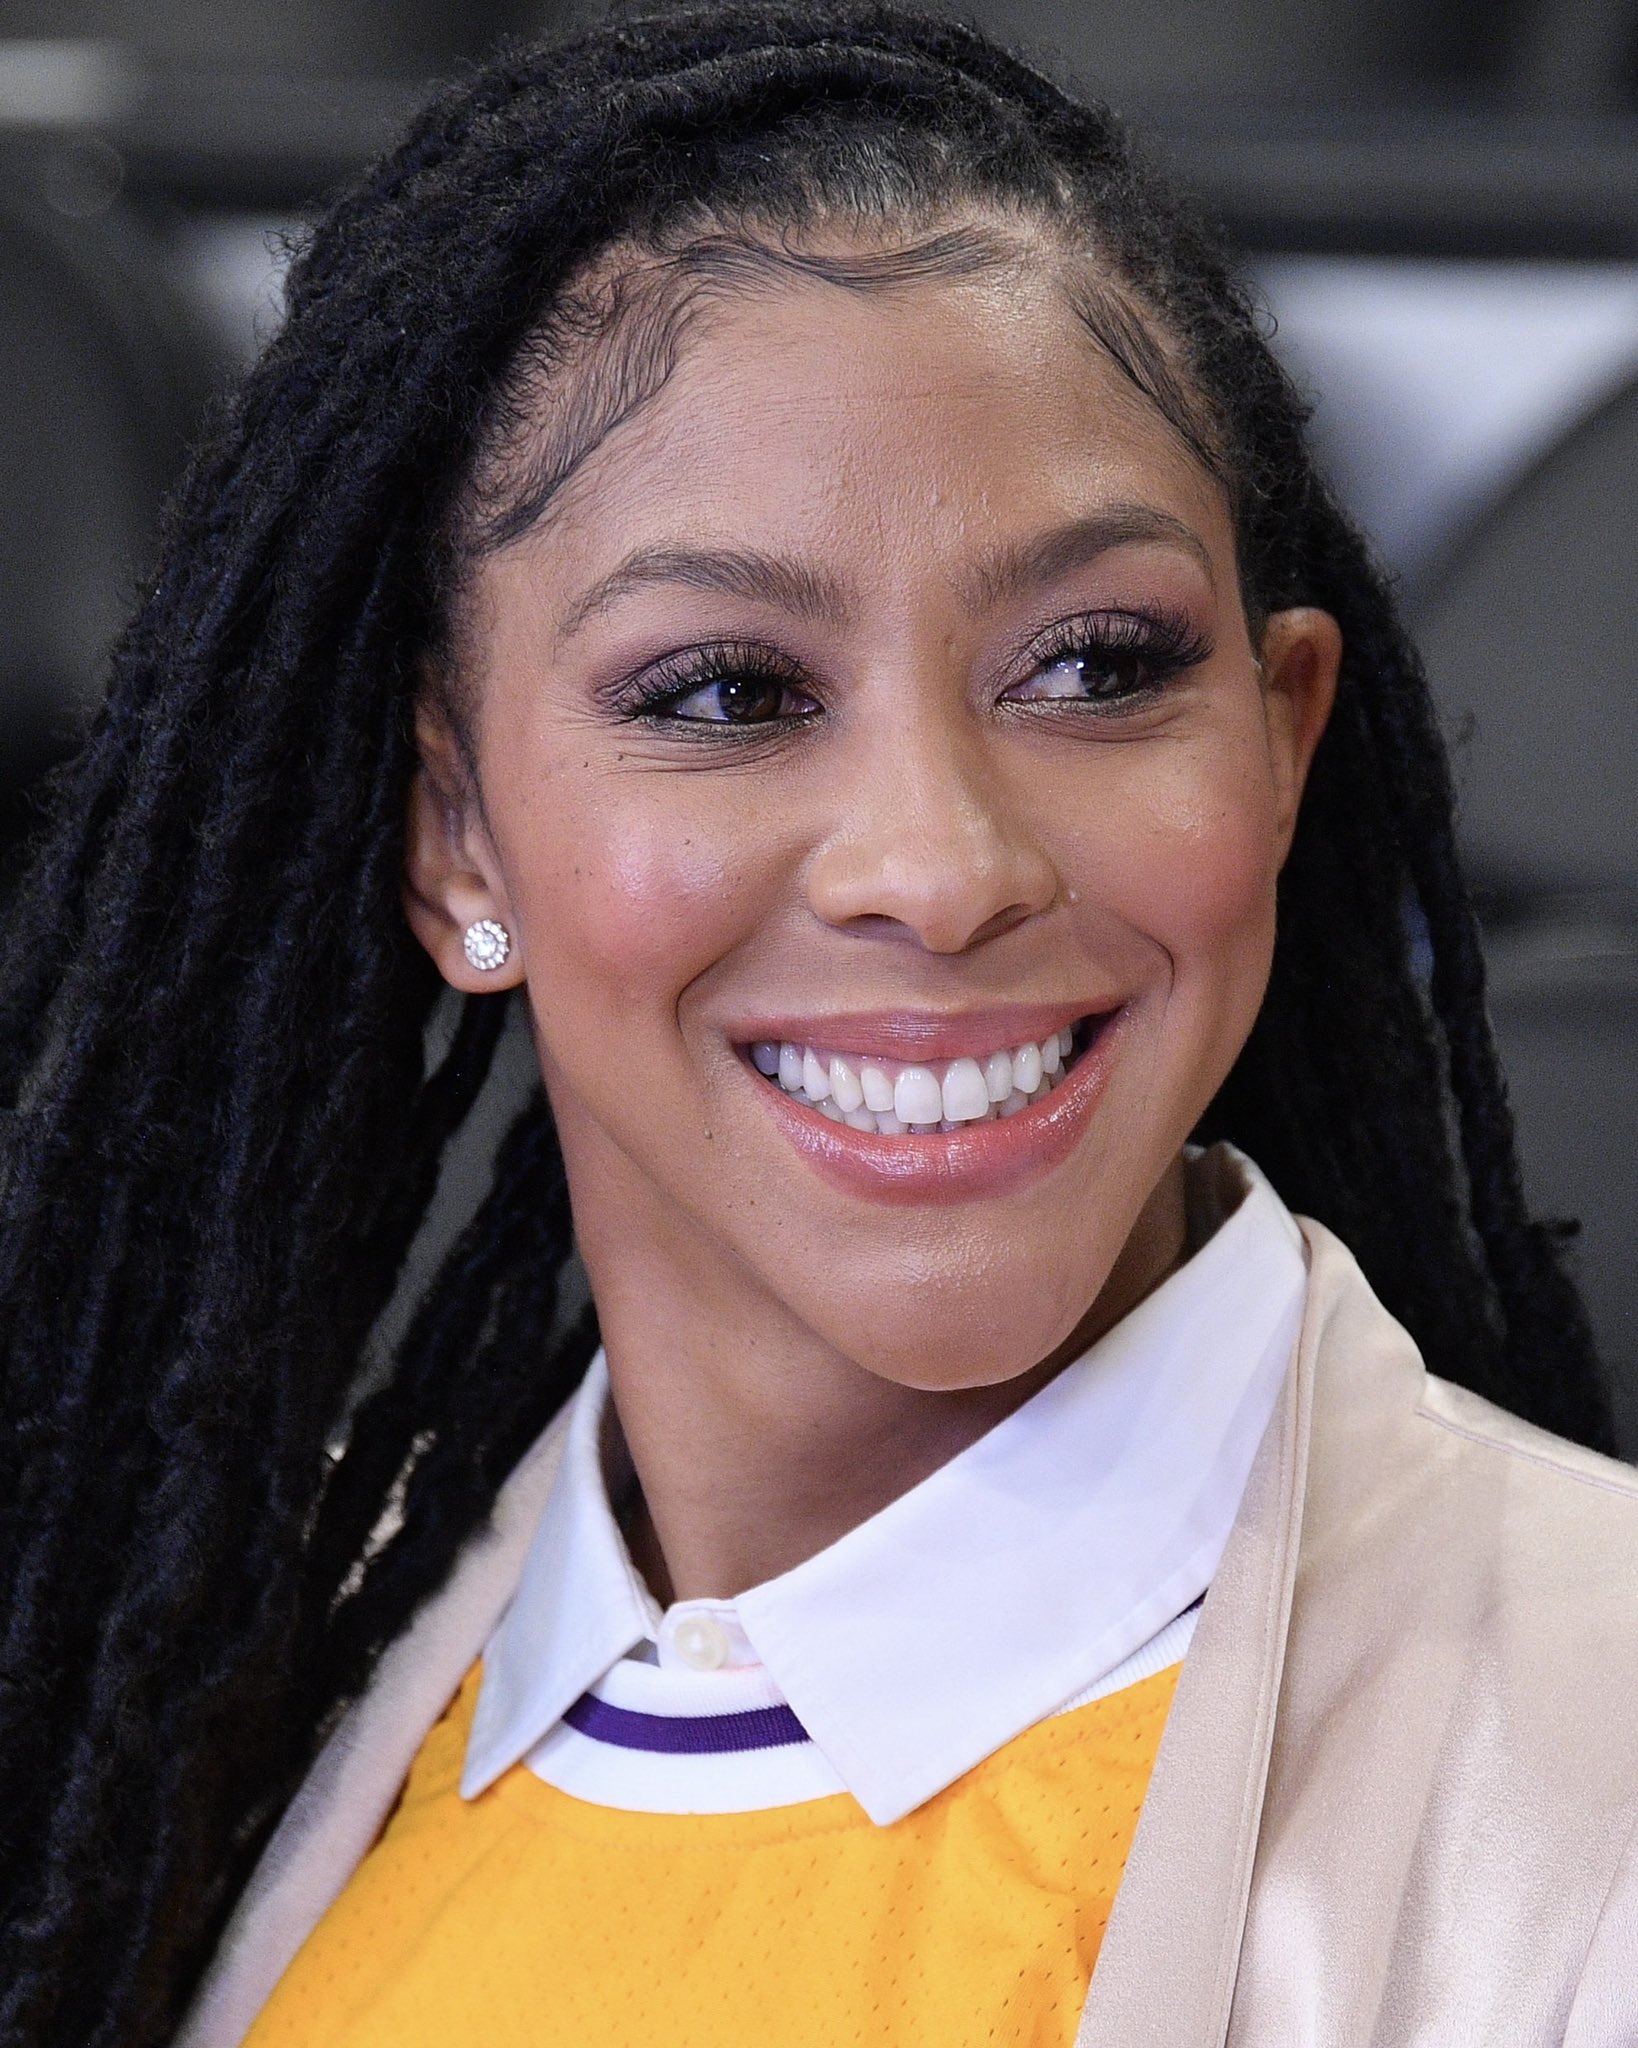 Candace Parker Will Be First Female Color Commentator For NBA All-Star Game